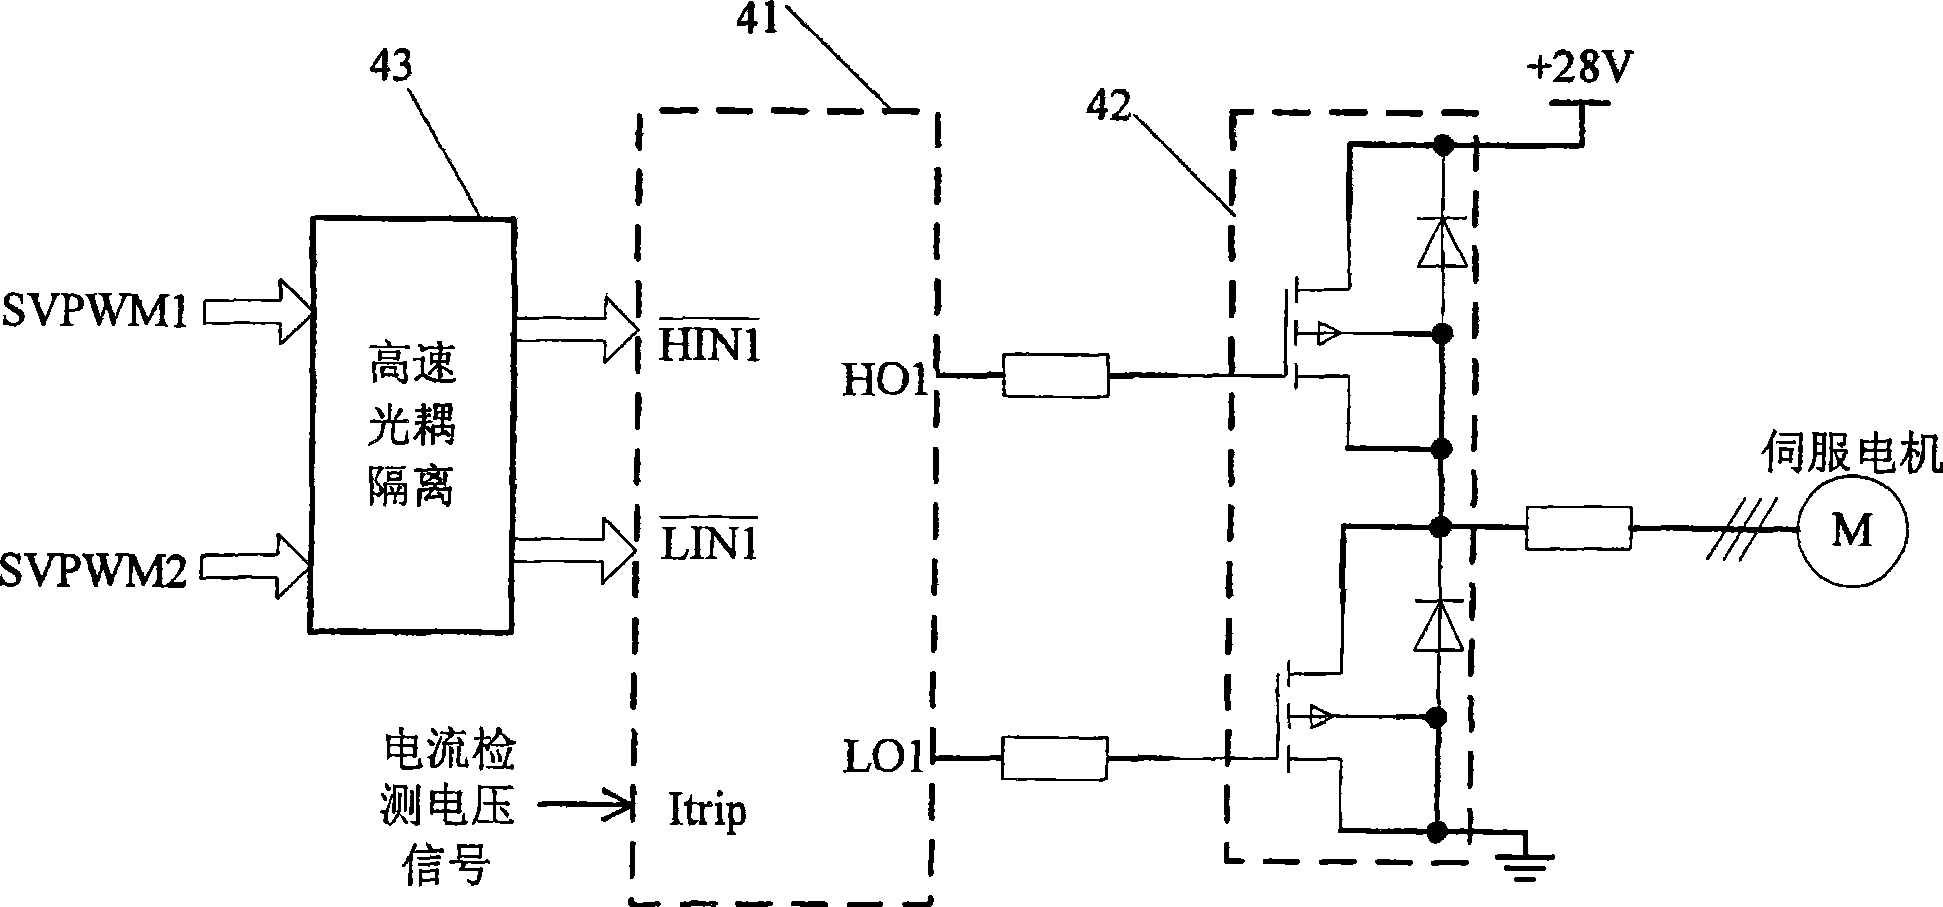 Control system for satellite antenna motion